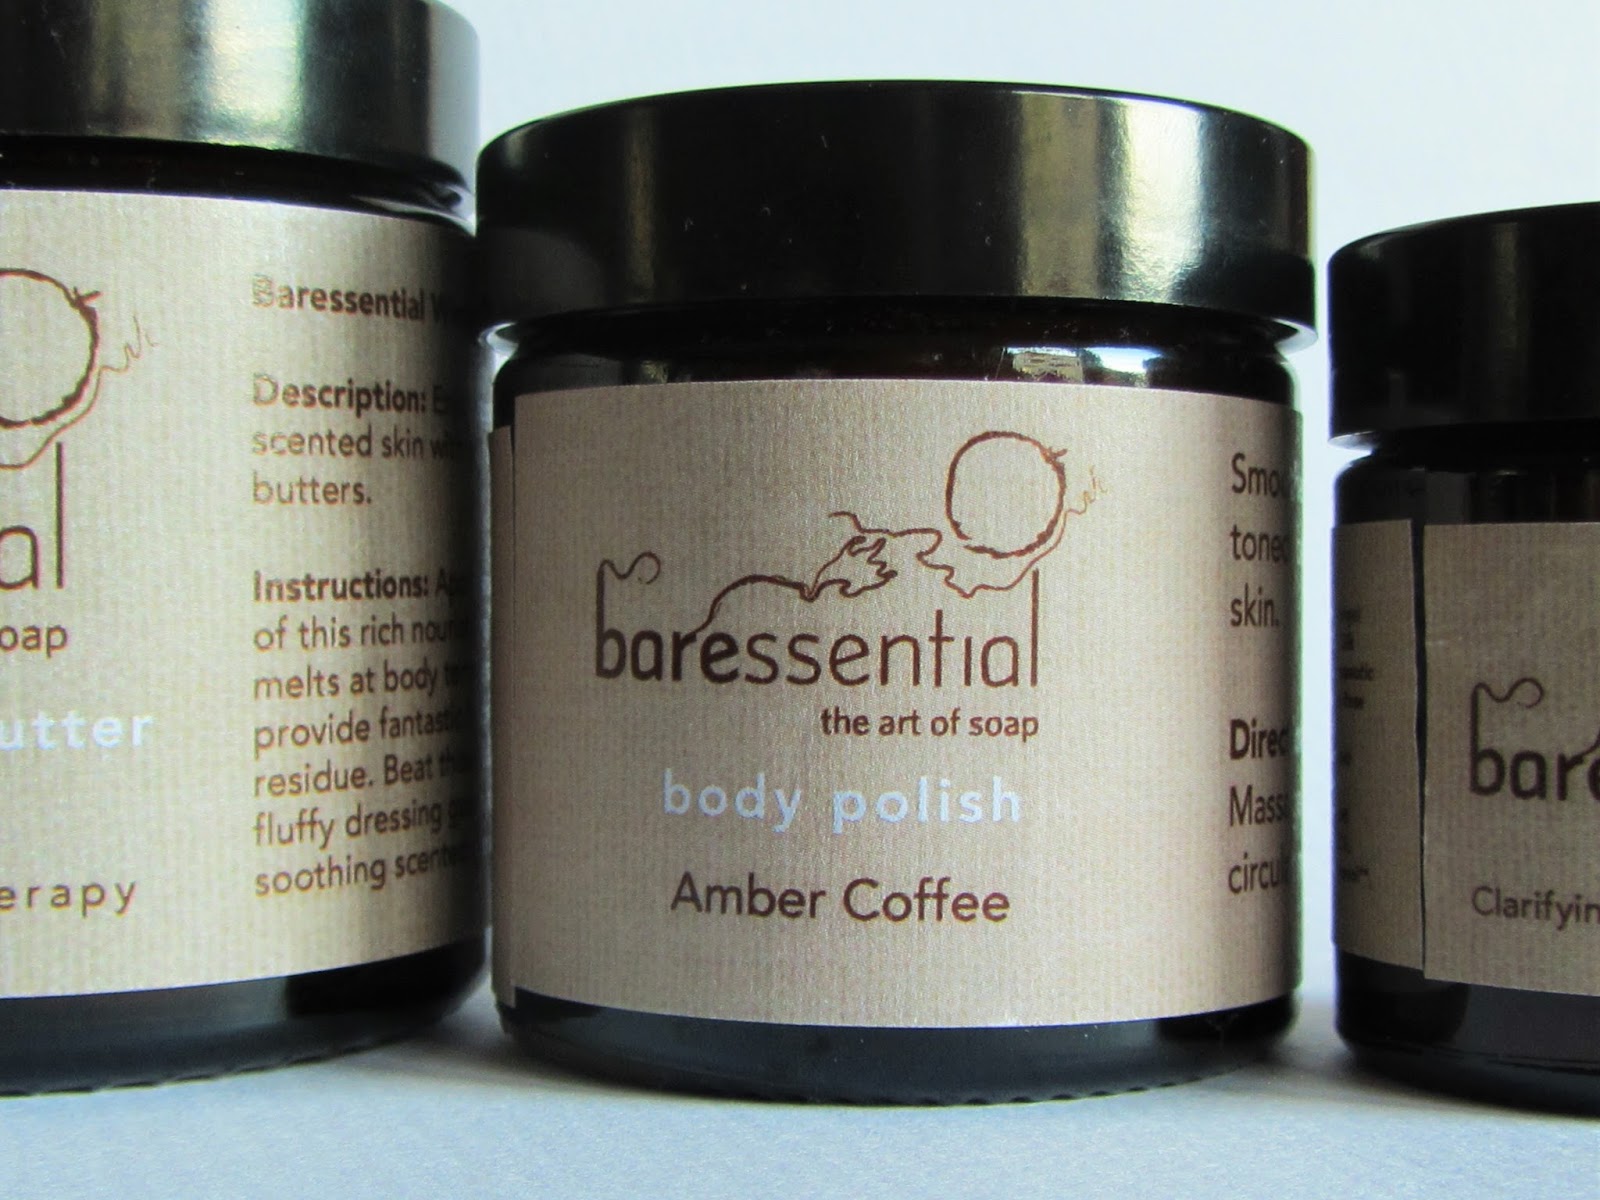 Baressential Product Review, natural and organic for body and face